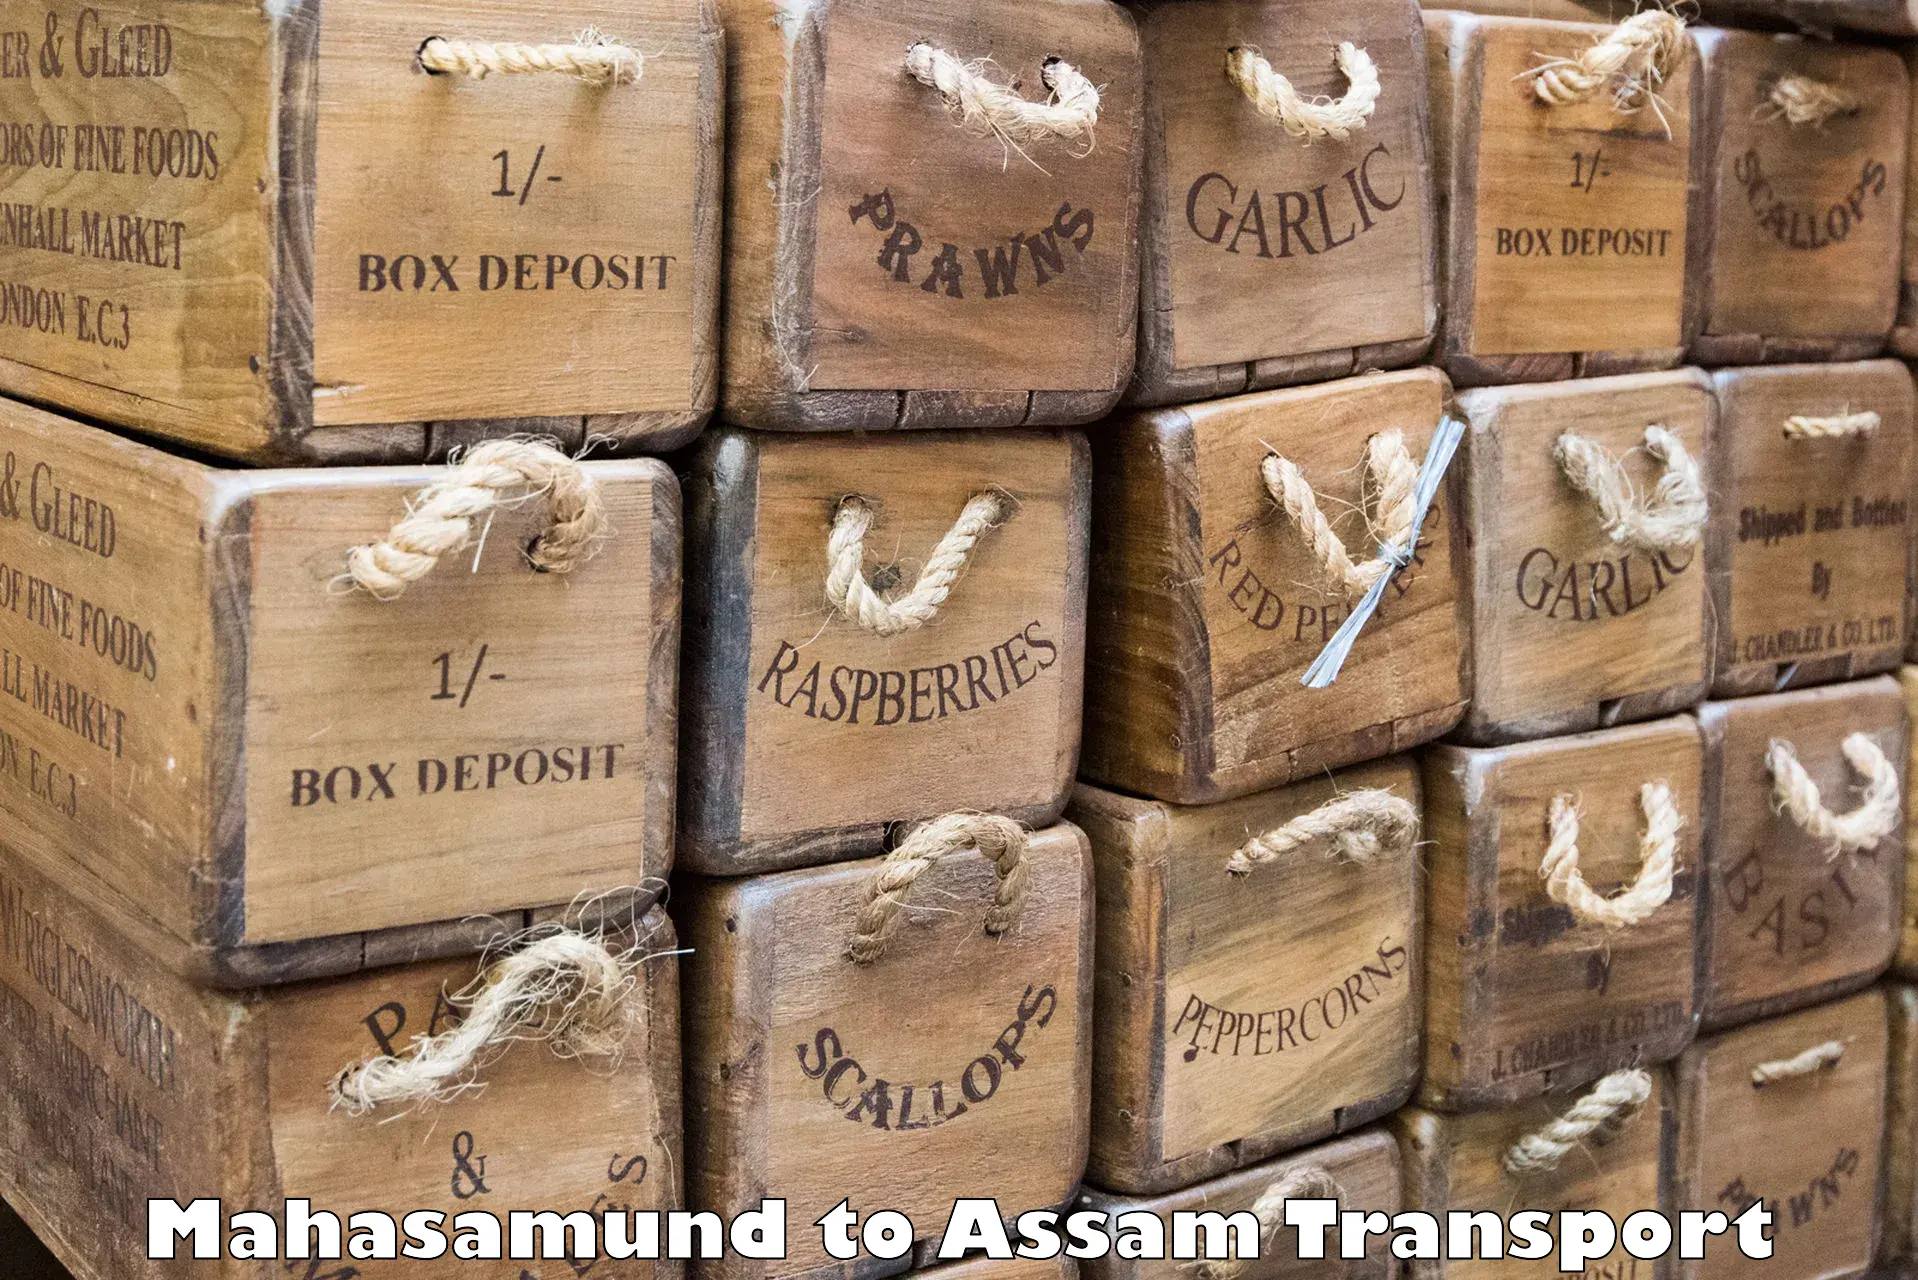 Container transport service Mahasamund to Kampur